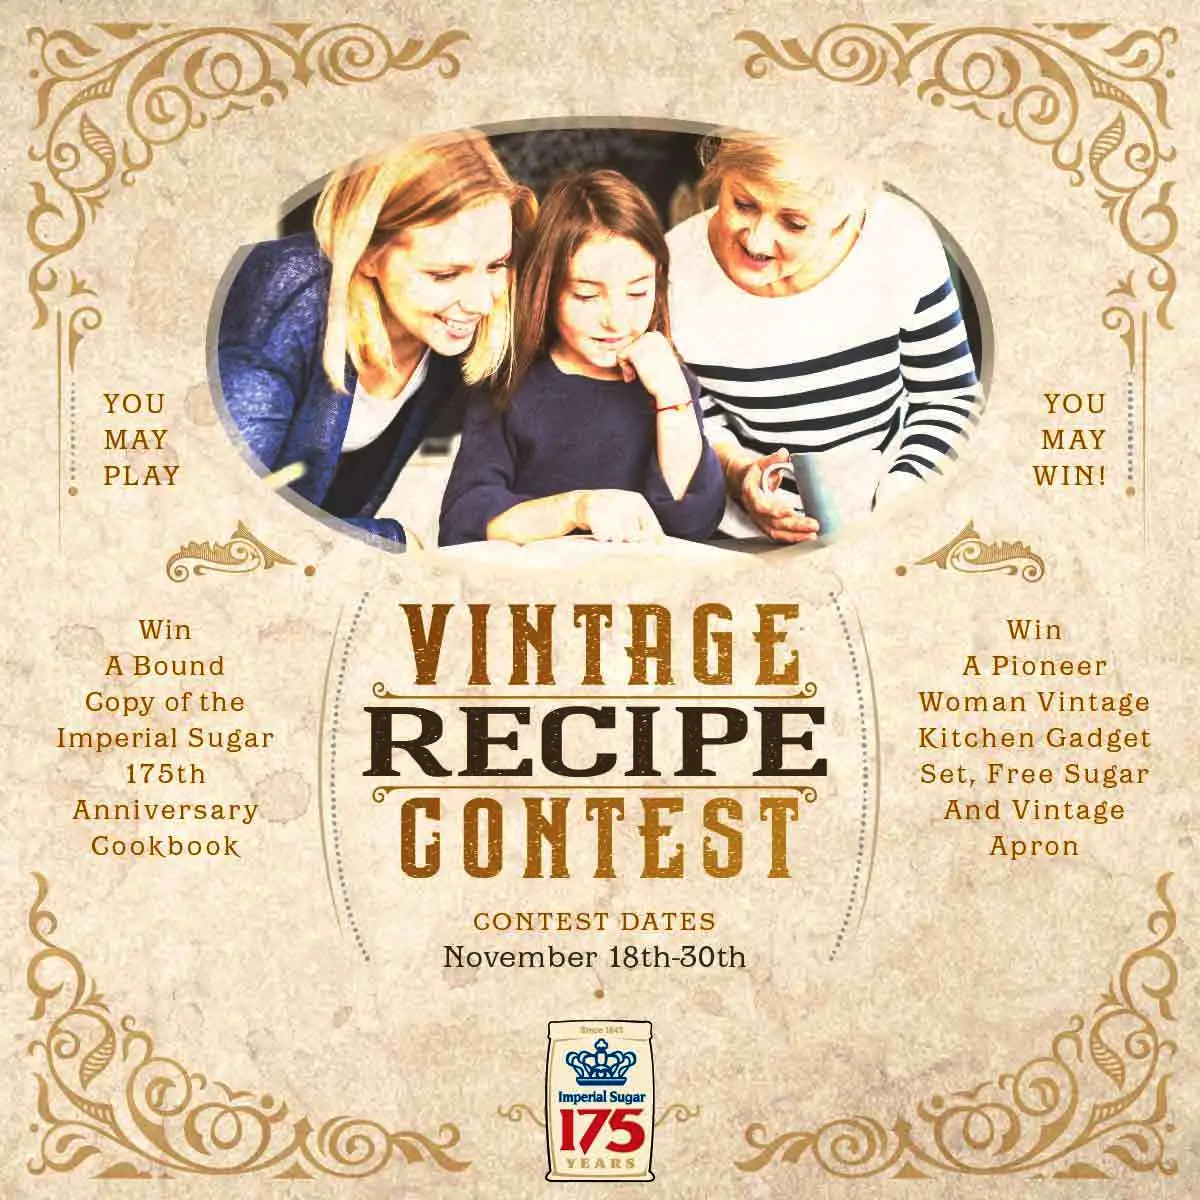 Fifty Imperial Sugar and Dixie Crystals winners will each receive a bound copy of the limited edition of the Imperial Sugar 175th Anniversary Cookbook or Dixie Crystals 100th Anniversary Cookbook, a Pioneer Woman Vintage Kitchen Gadget Set, and more!